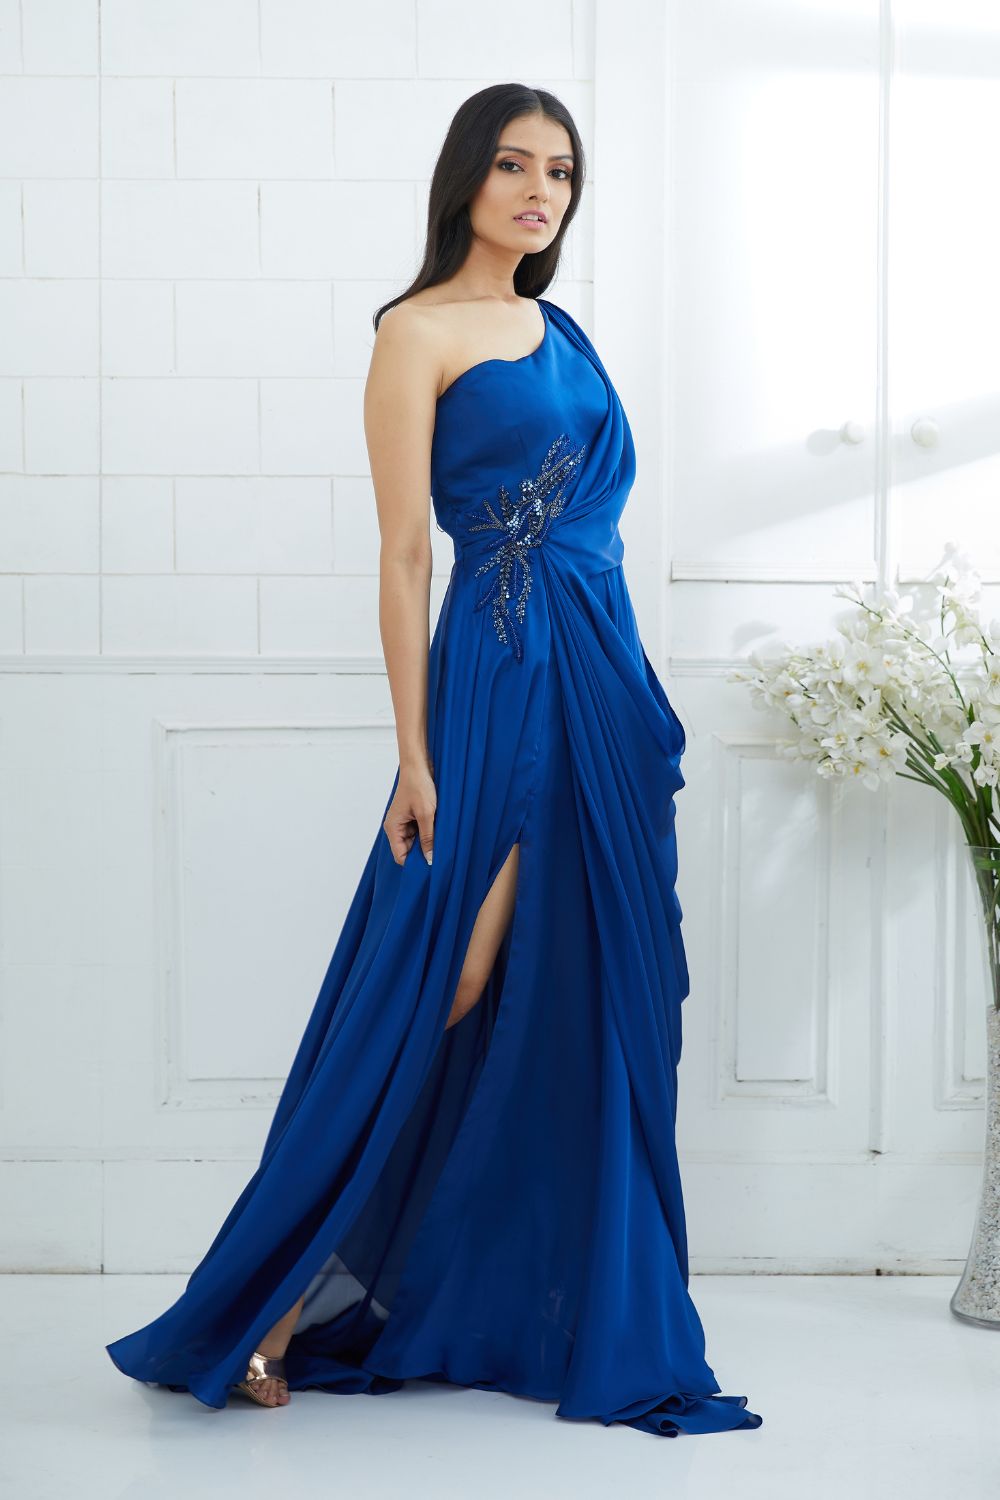 Wedding Womens Gowns - Buy Wedding Womens Gowns Online at Best Prices In  India | Flipkart.com